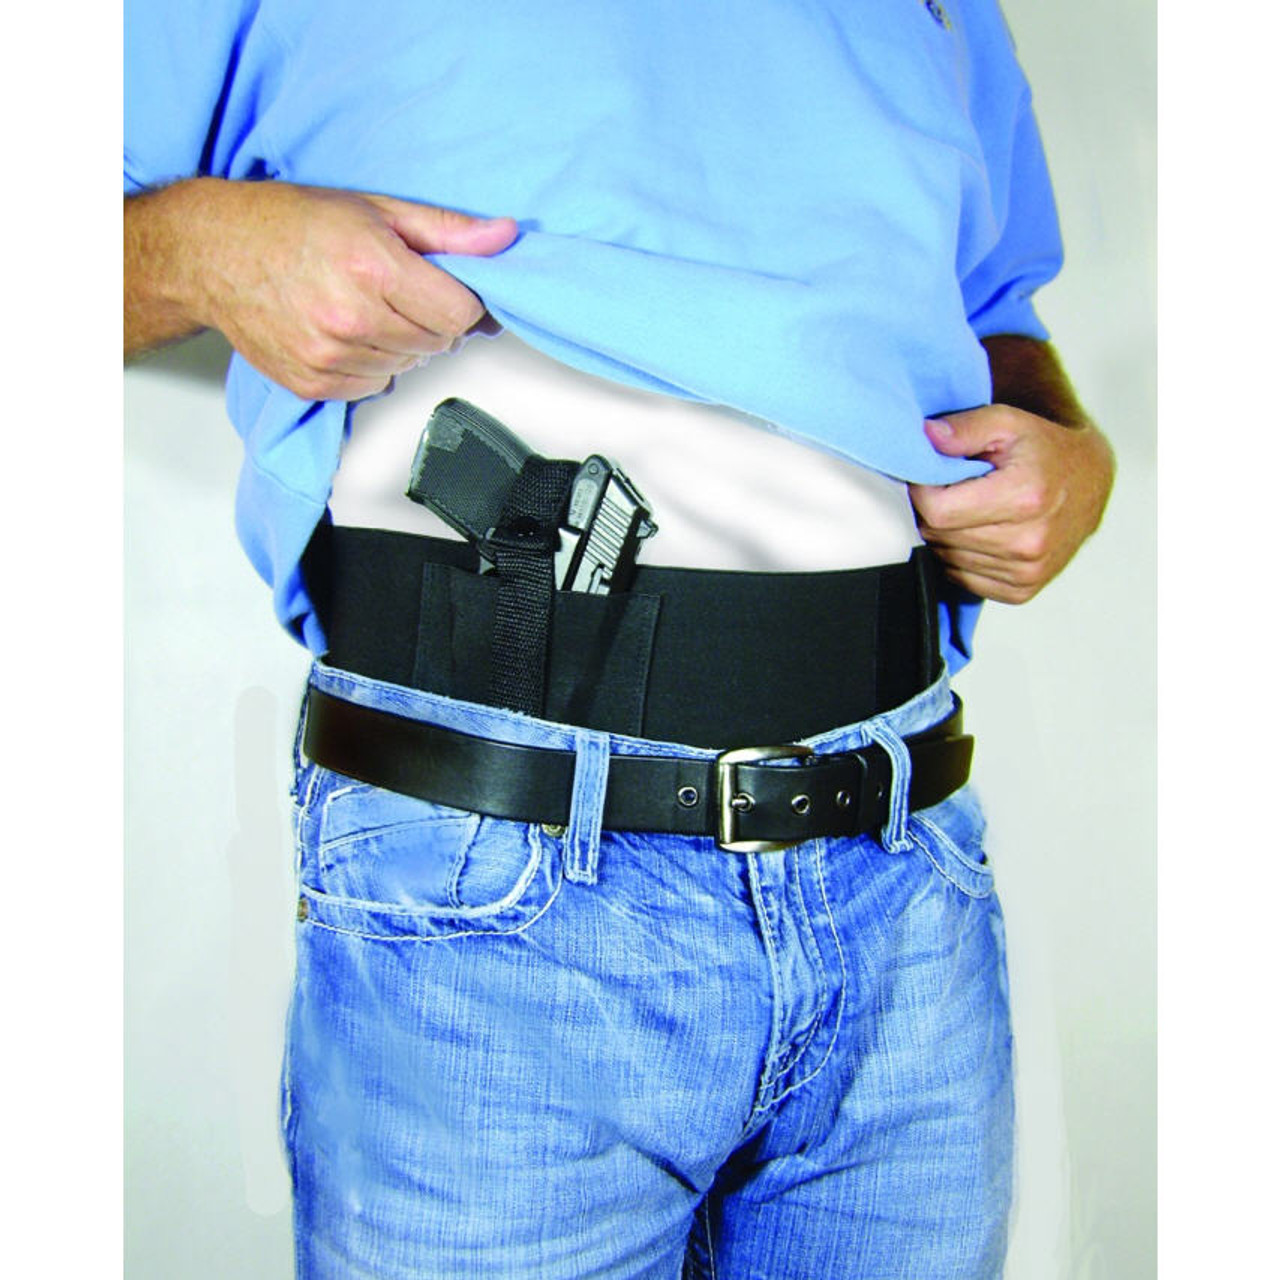 XL Ultimate Belly Band Holster for Concealed Carry, Black